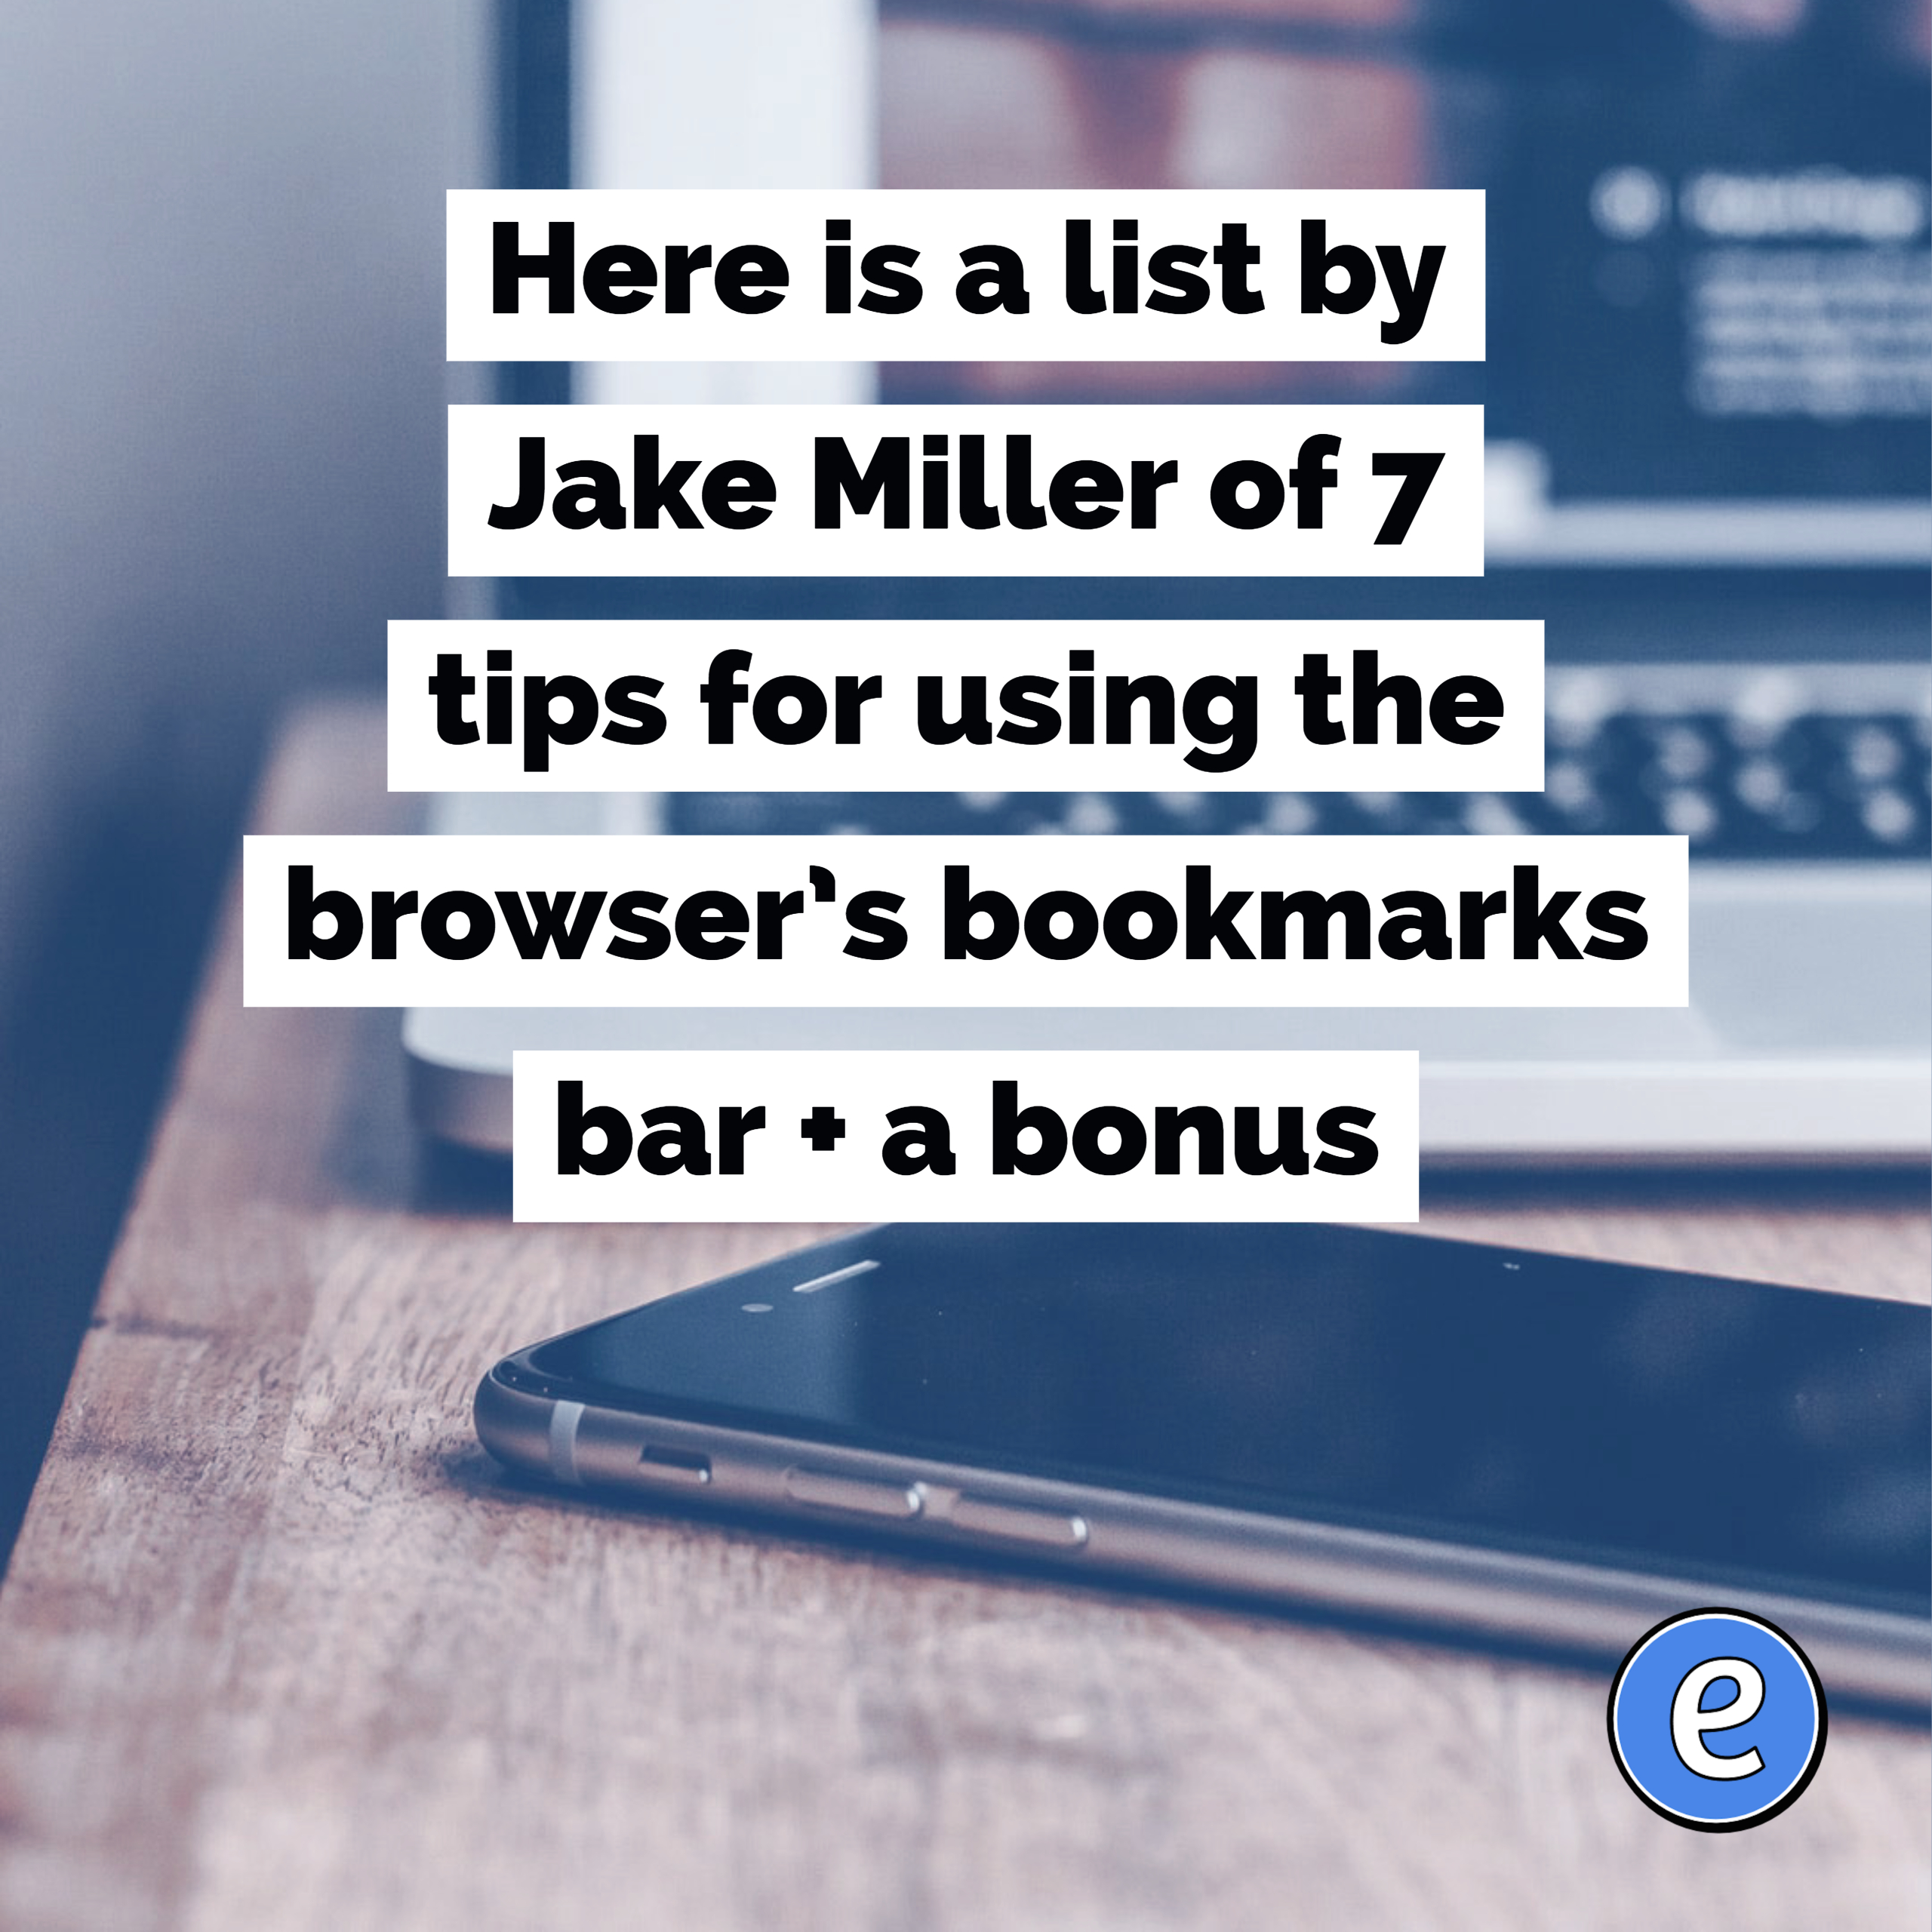 Here is a list by Jake Miller of 7 tips for using the browser’s bookmarks bar + a bonus